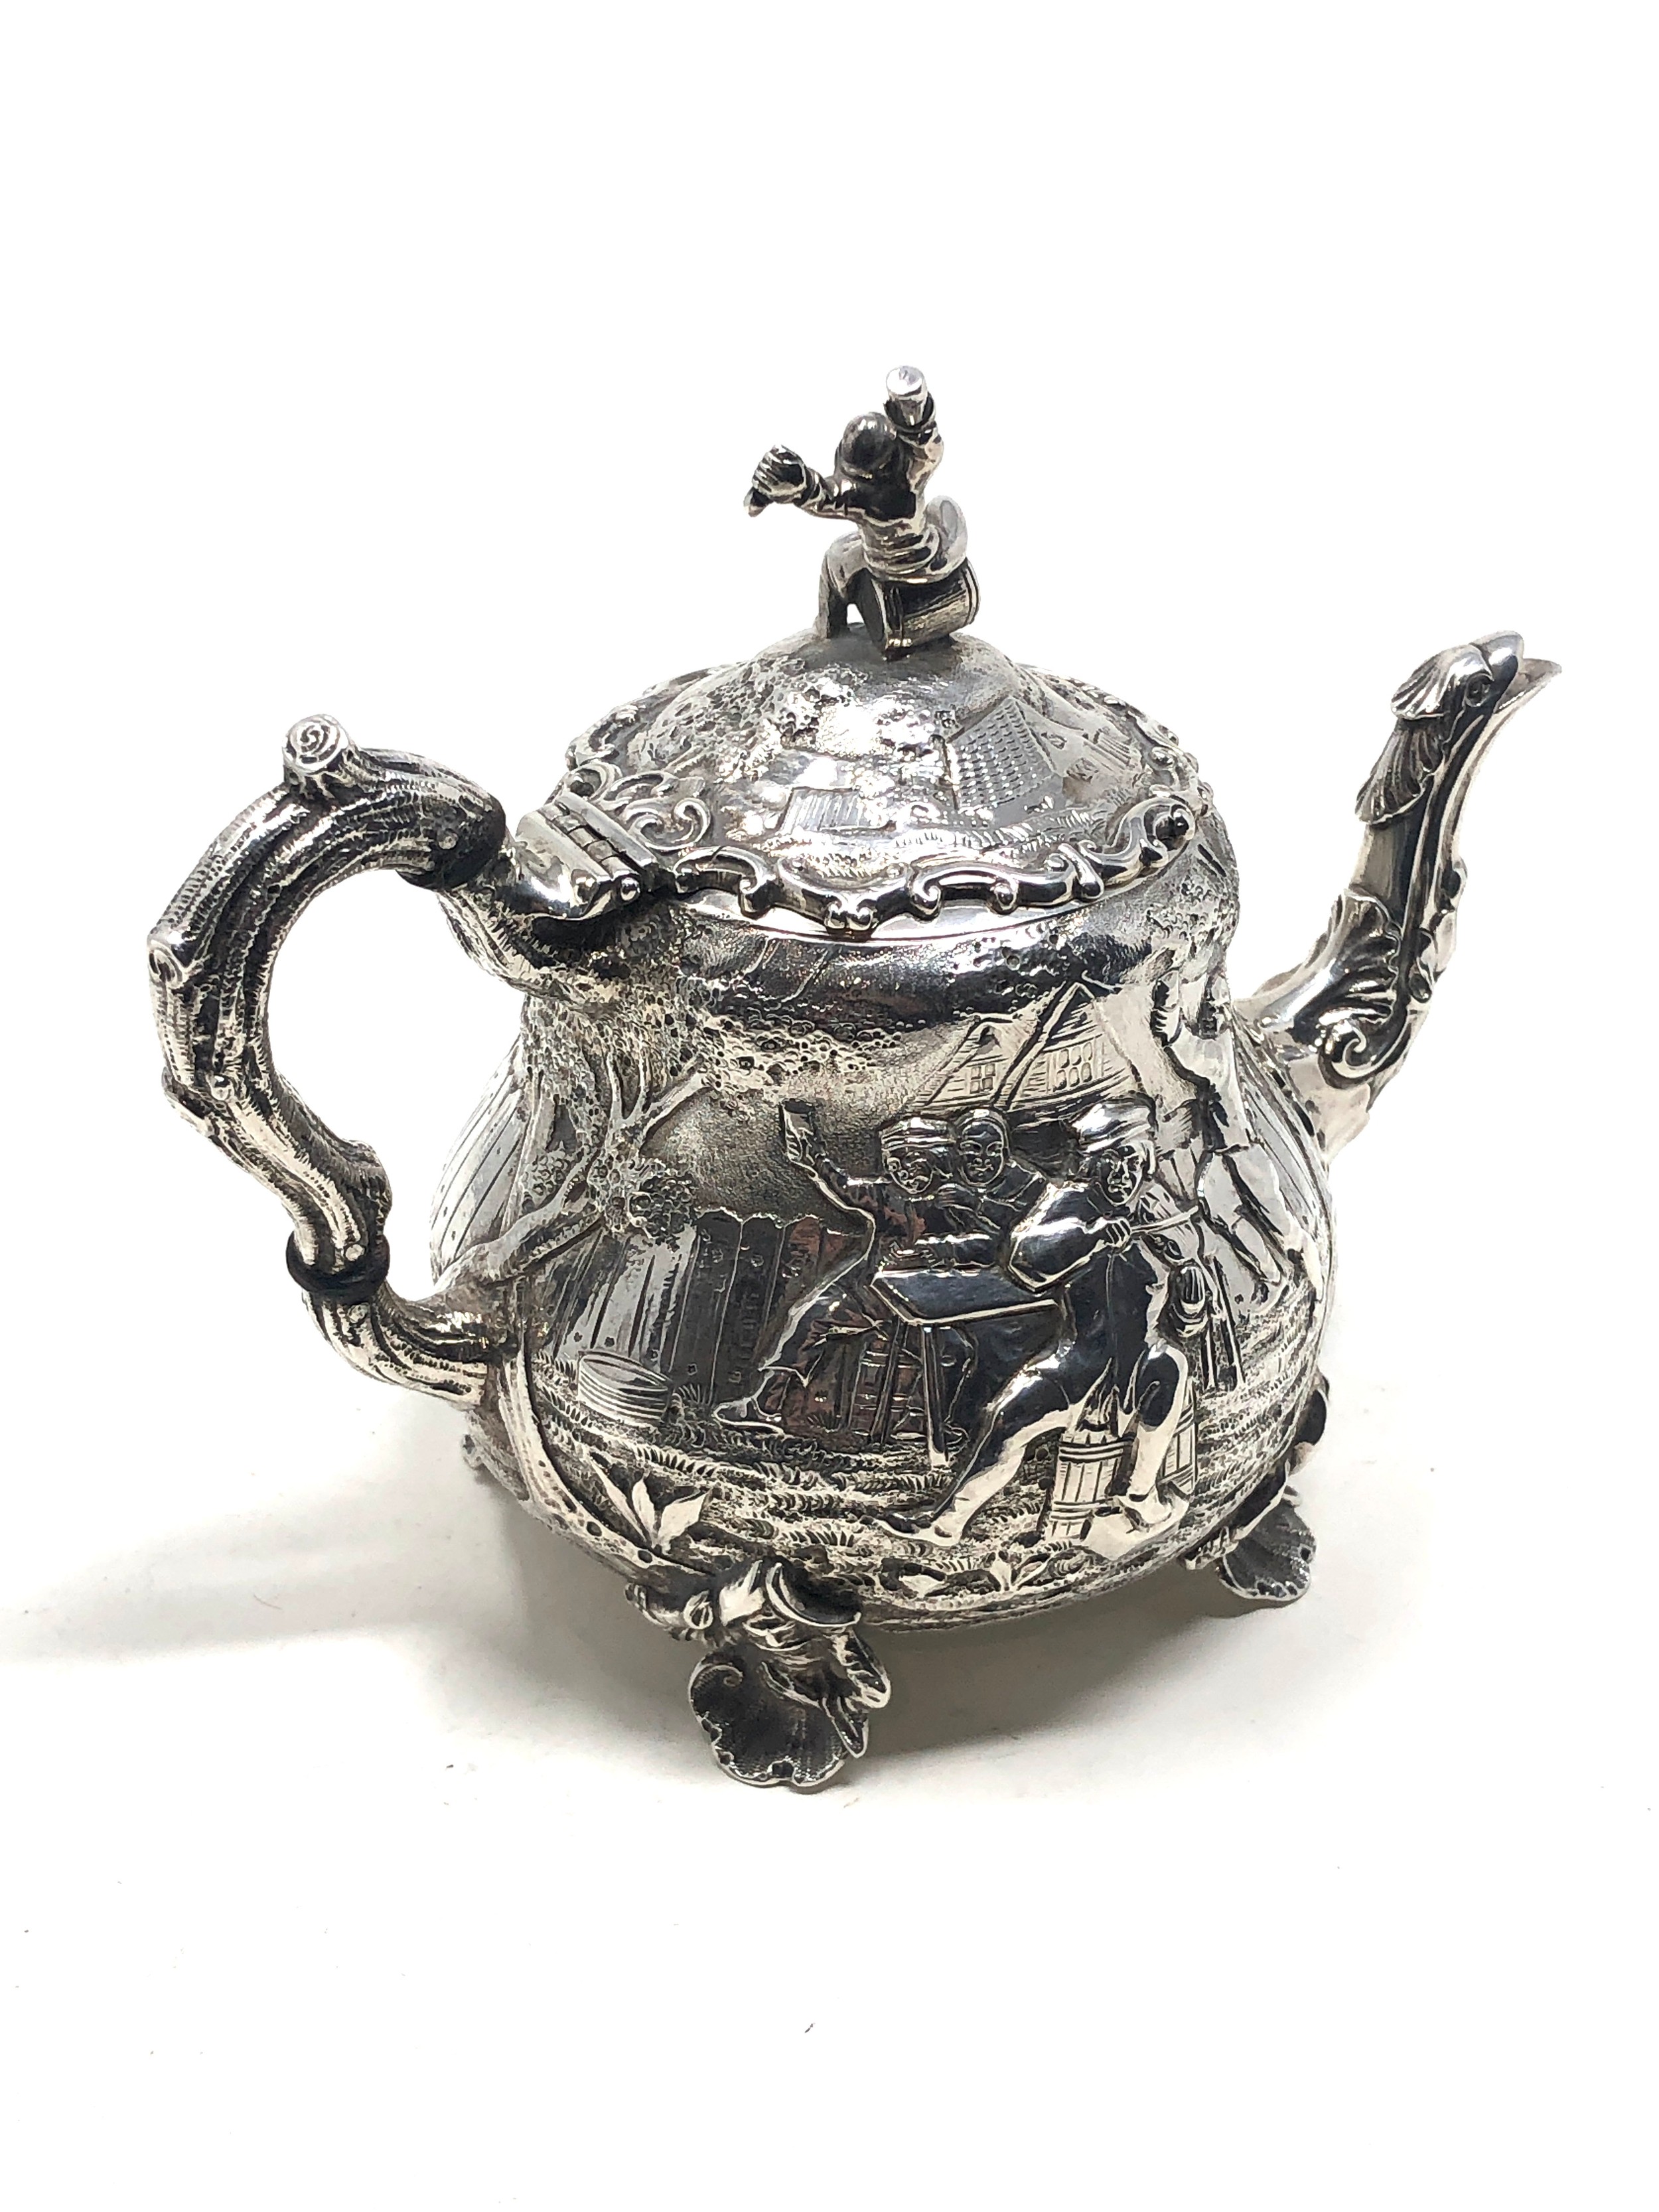 Fine Antique Victorian silver bachelor teapot either side with scenes after "Tennier" London - Image 2 of 8